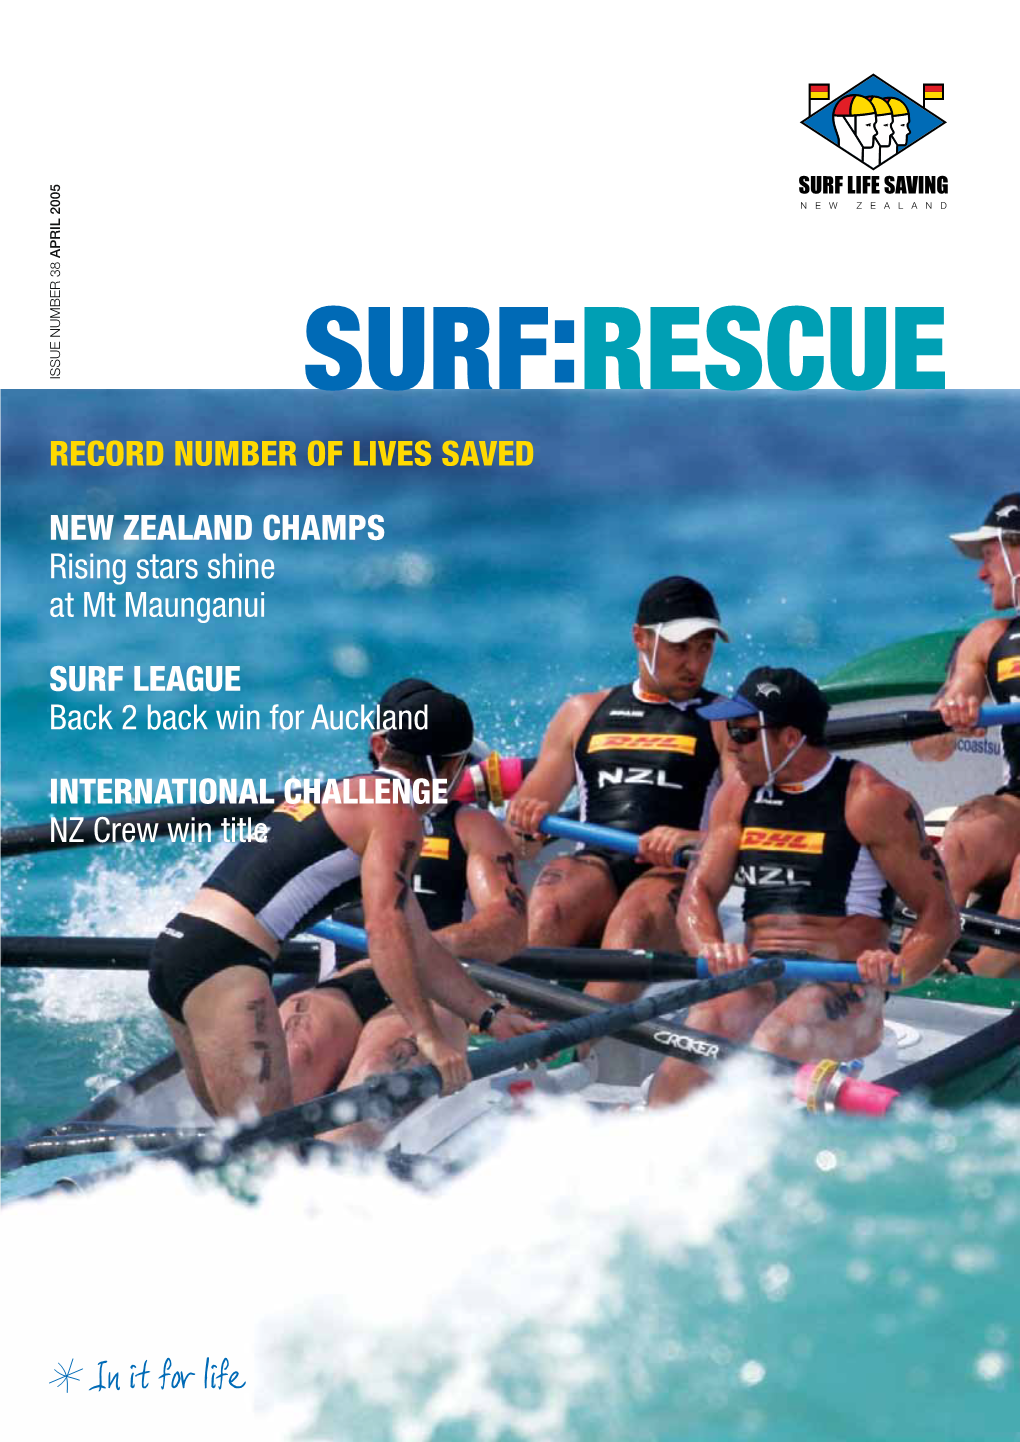 SURF:RESCUE 1 Features SURF:RESCUE Issue 38 - April 2005